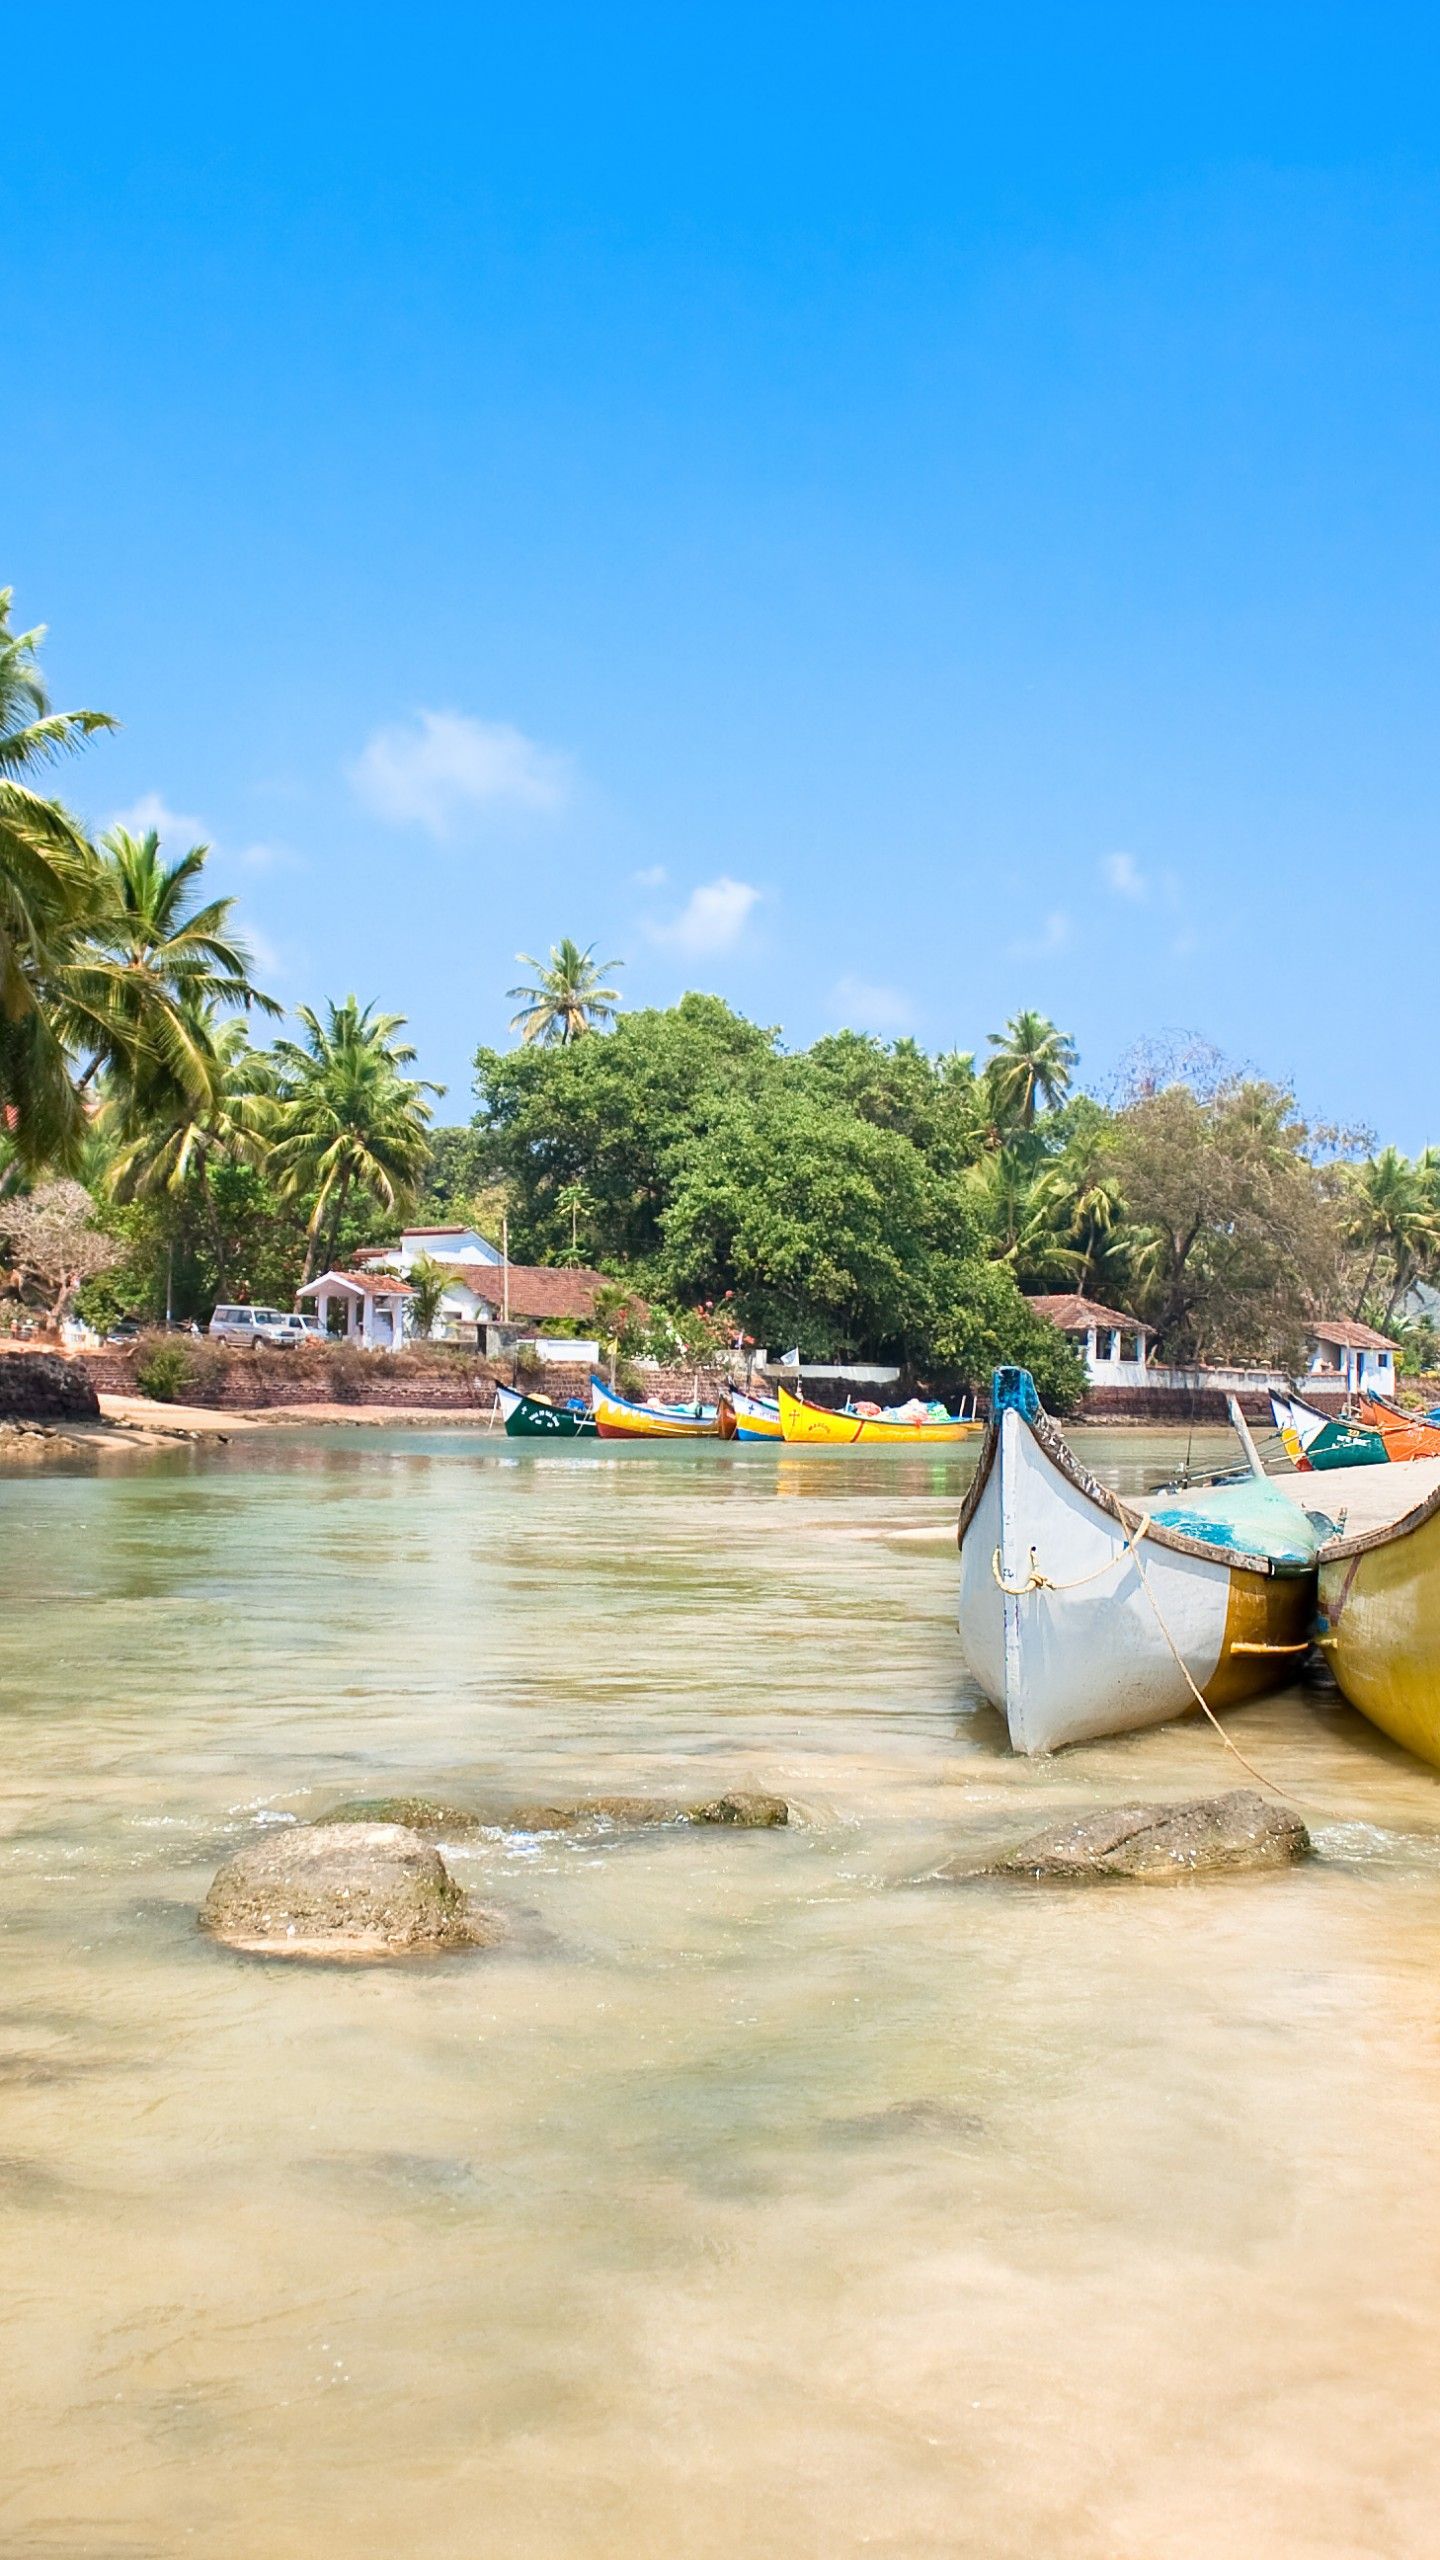 Wallpaper Goa, 5k, 4k wallpaper, India, Indian ocean, palms, boats, travel, tourism, Best Beaches in the World, Nature